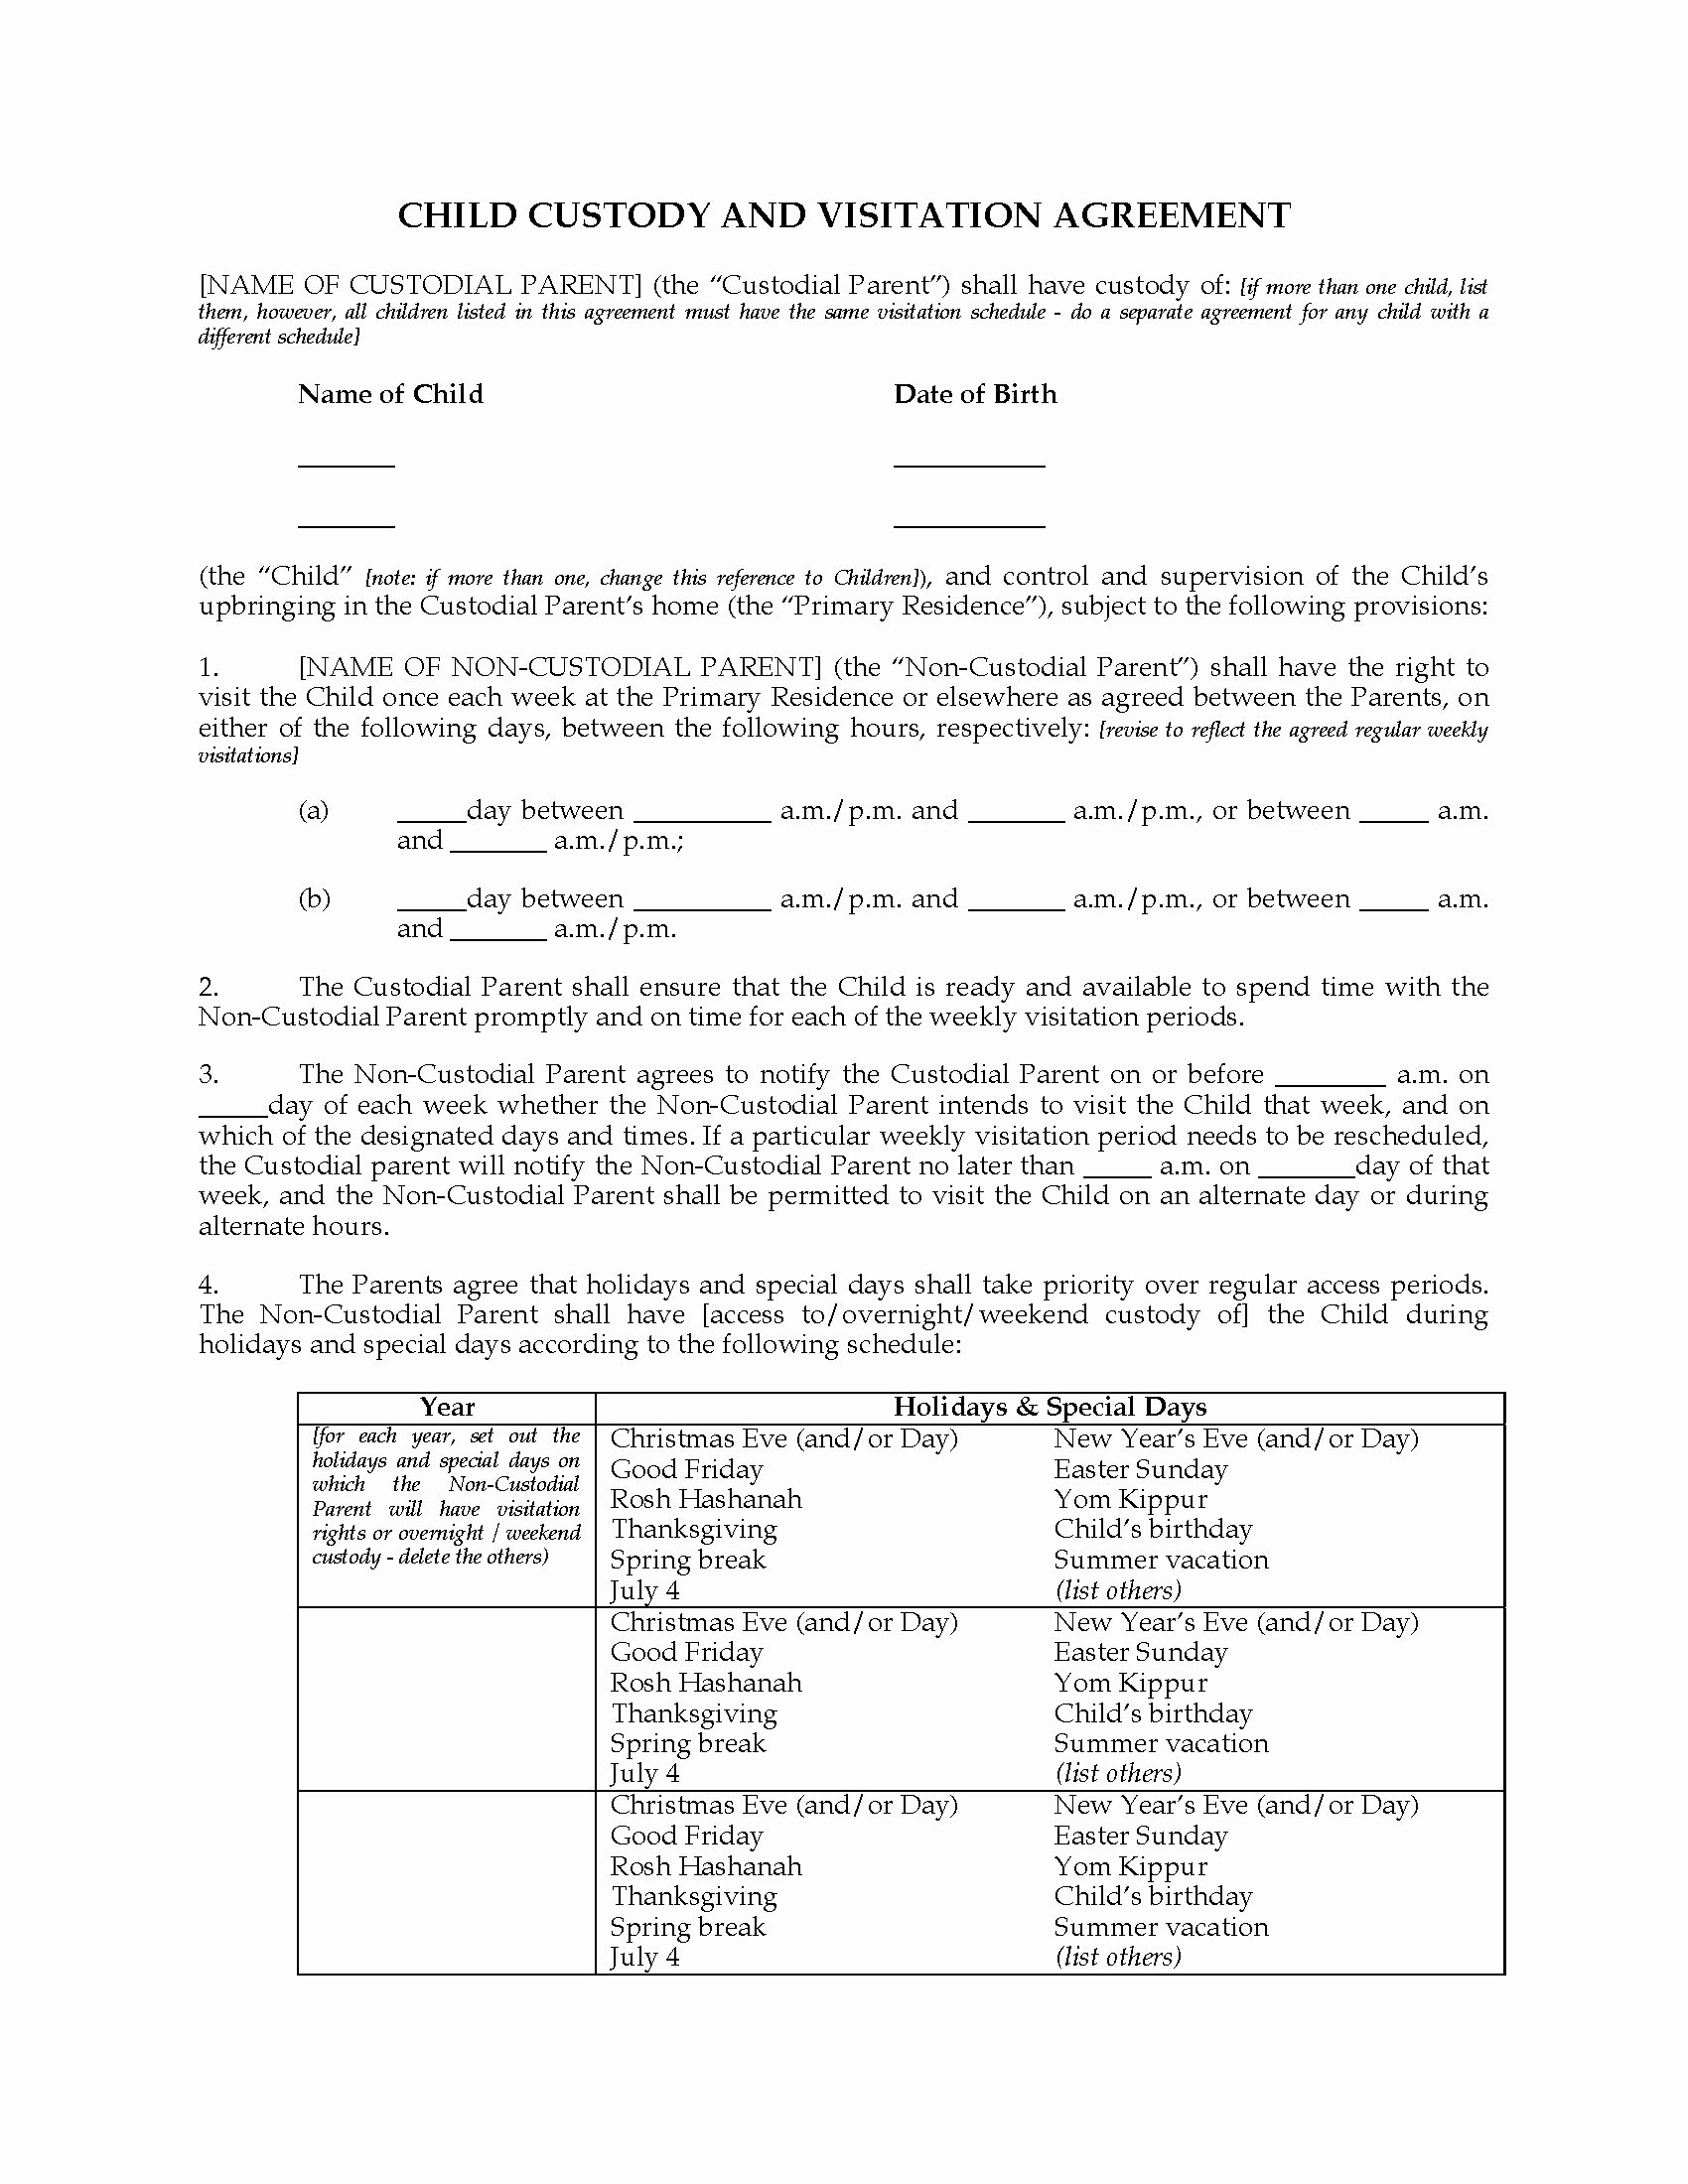 Child Visitation Agreement Template Awesome Usa Child Custody and Visitation Agreement Between Parents